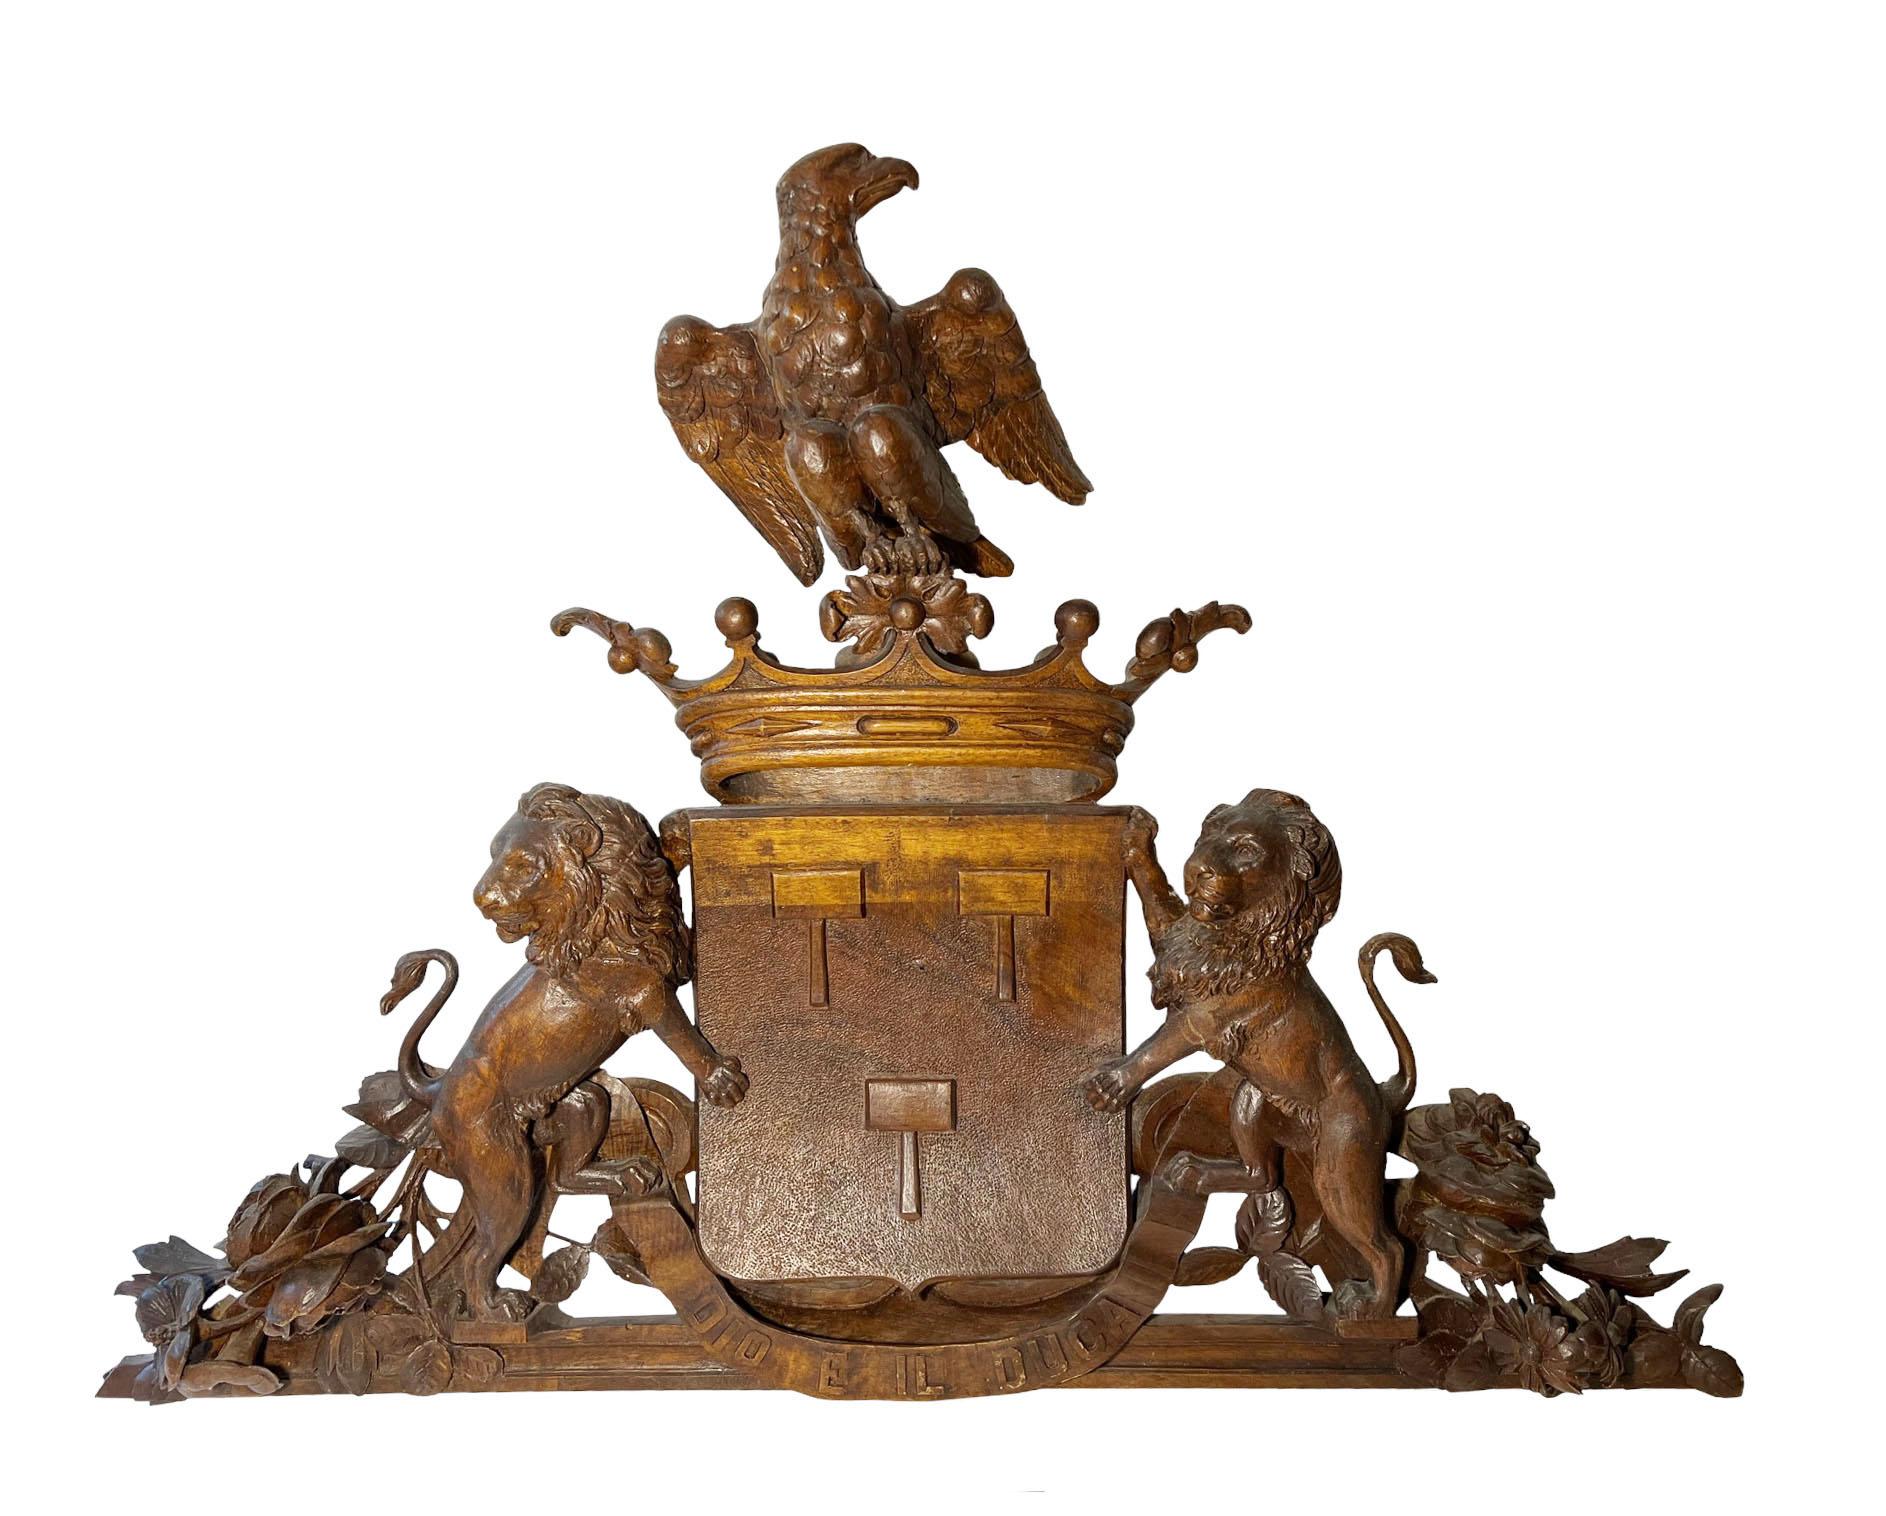 A near pair of 19th century, Italian hand carved armorial crest, pediments with crowns, eagles and lions. The carvings are beautifully executed. Each pediment displays a unique royal crown and shield carved below. One shield with three mallets has